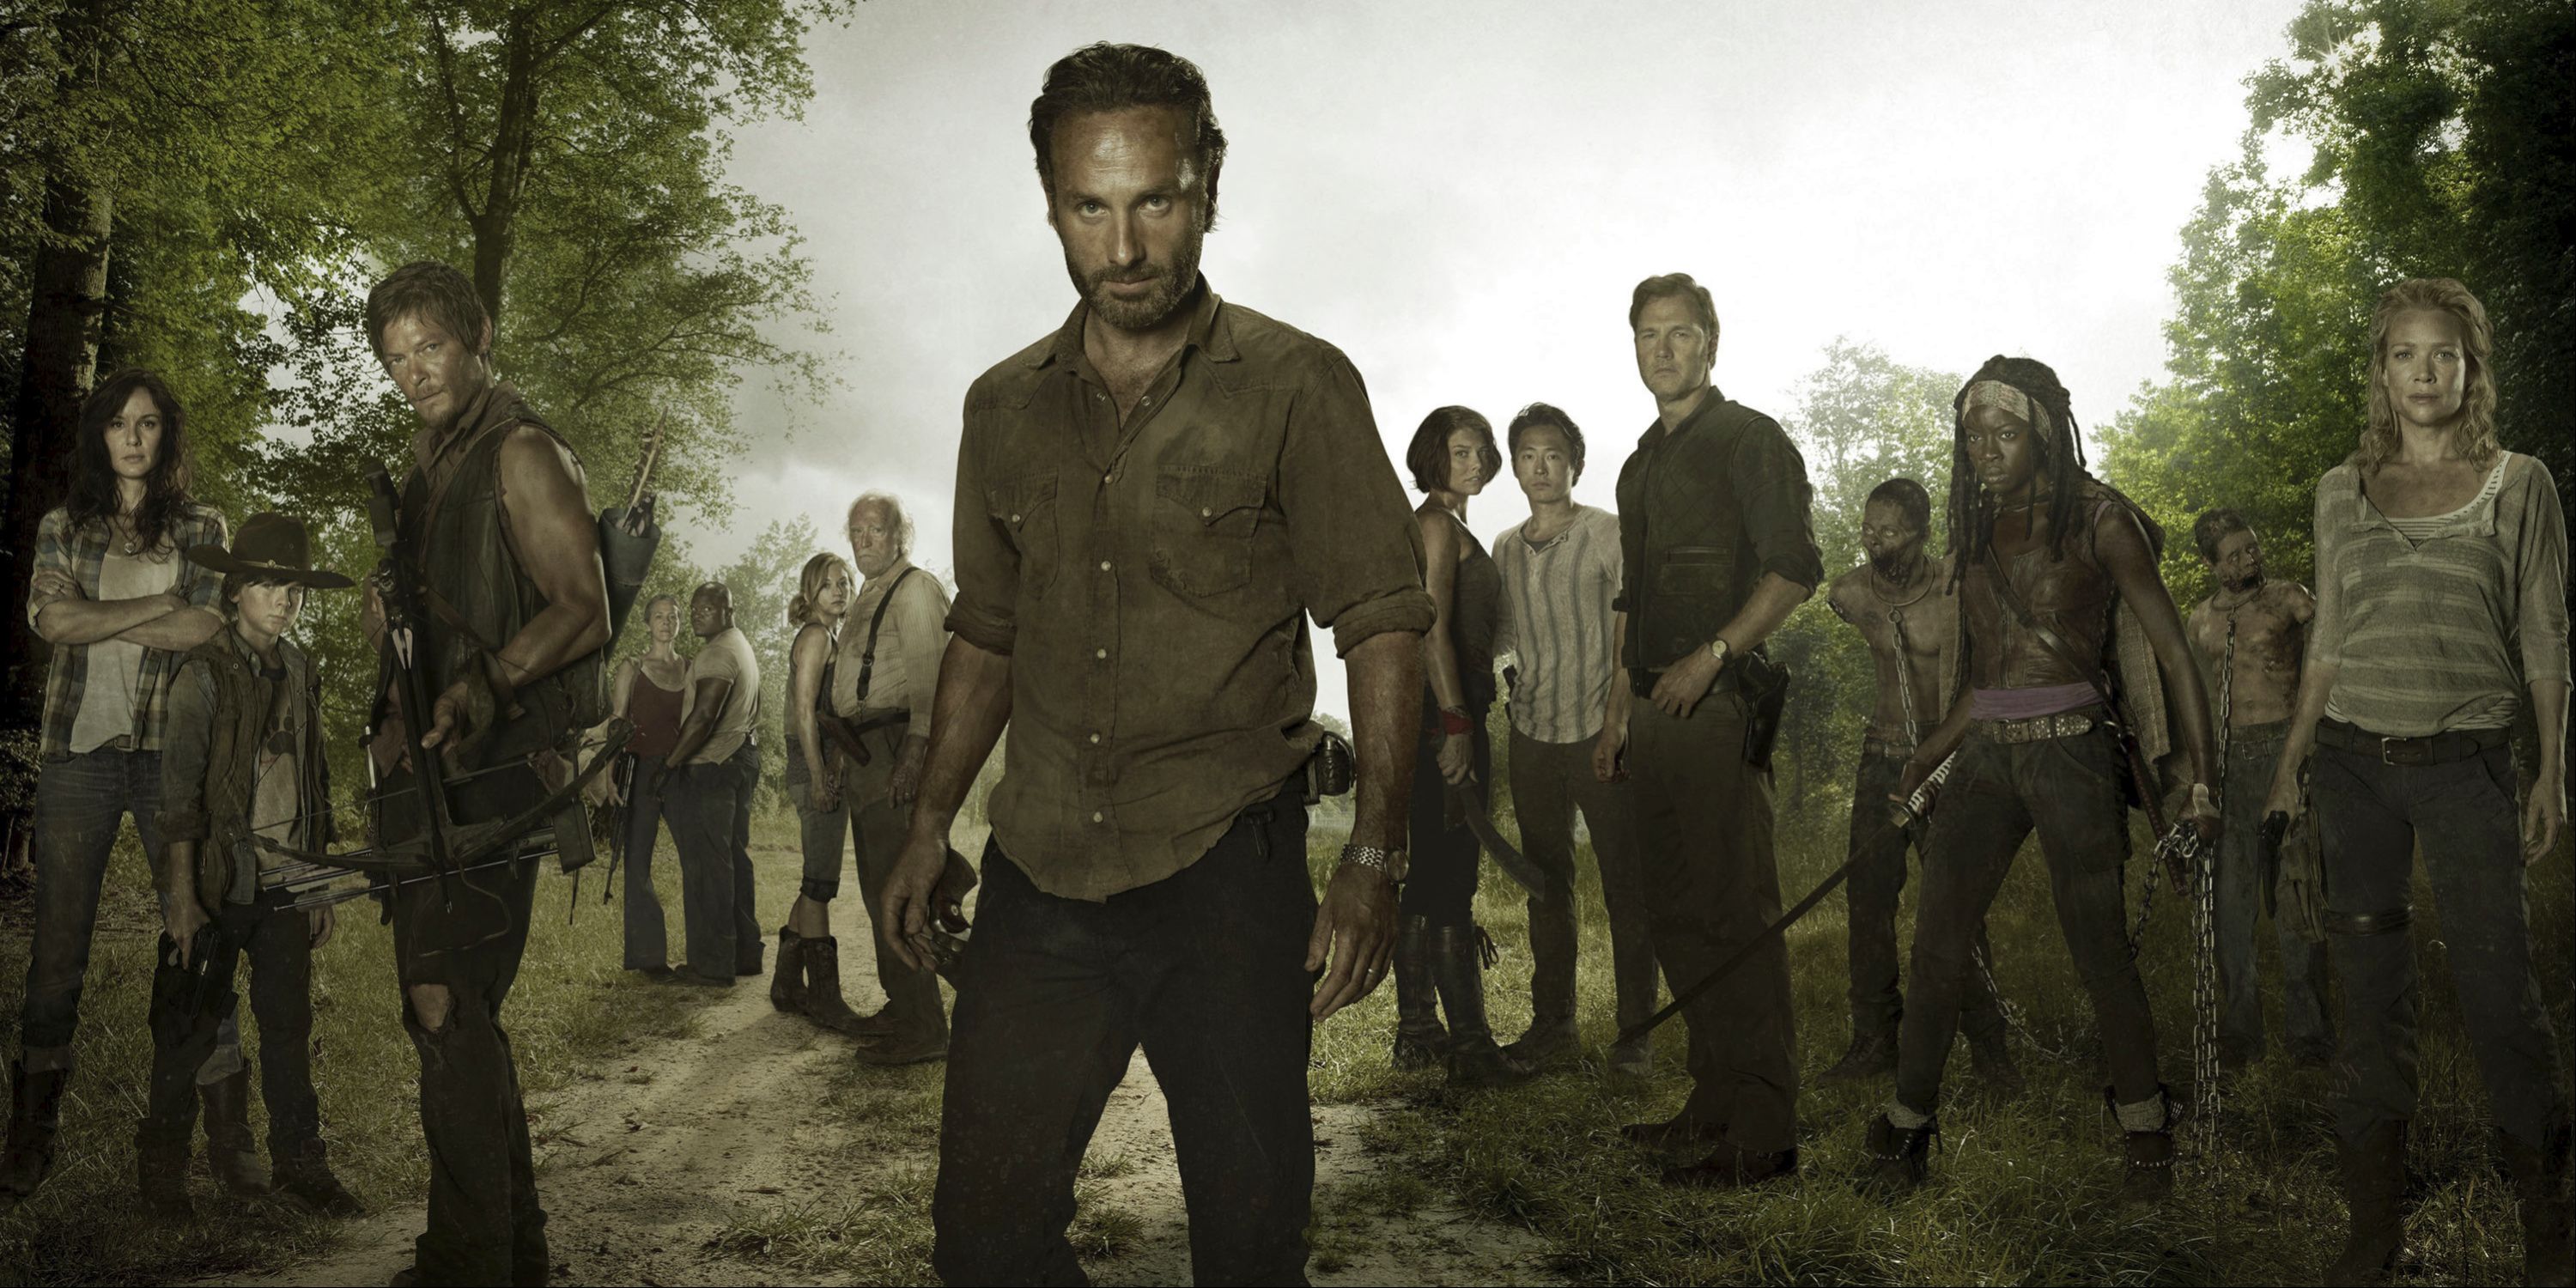 the cast of The Walking Dead posing